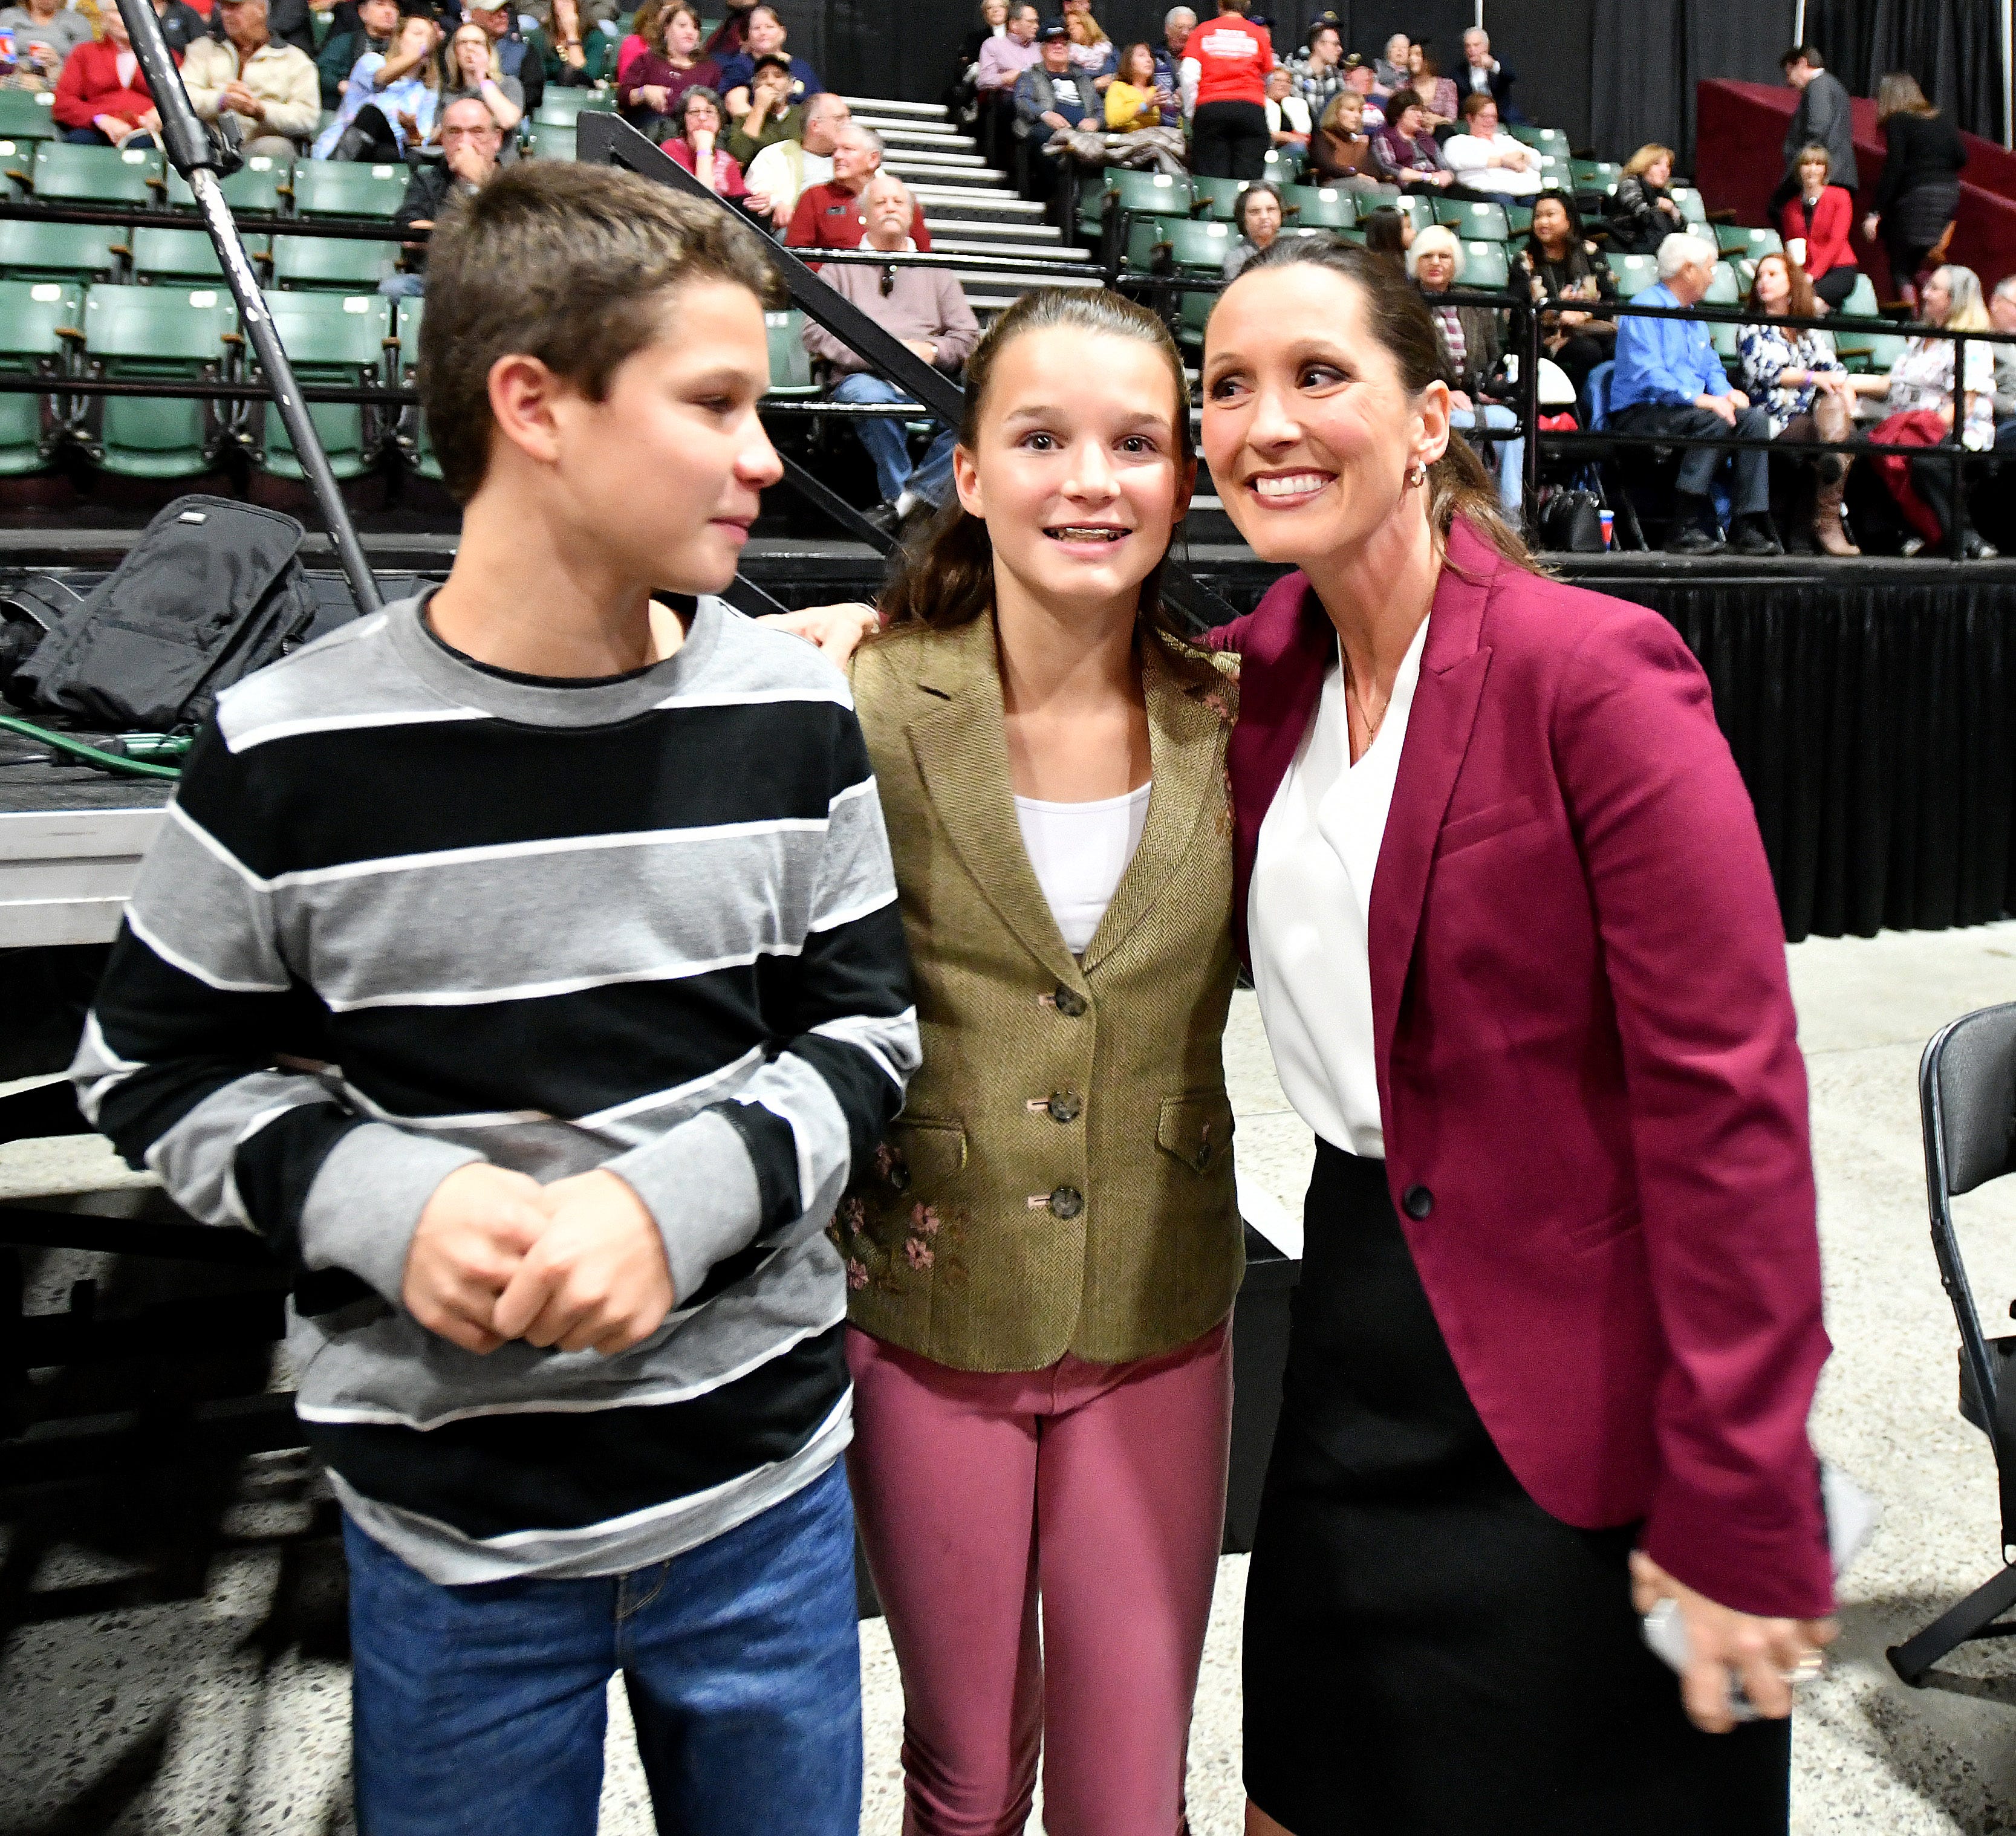 Lisa Posthumus Lyons poses with two of her four children — Easton and Charlie — before Vice President Mike Pence campaigns with Republican candidates at the DeltaPlex in Grand Rapids on Monday, Oct 29, 2018.